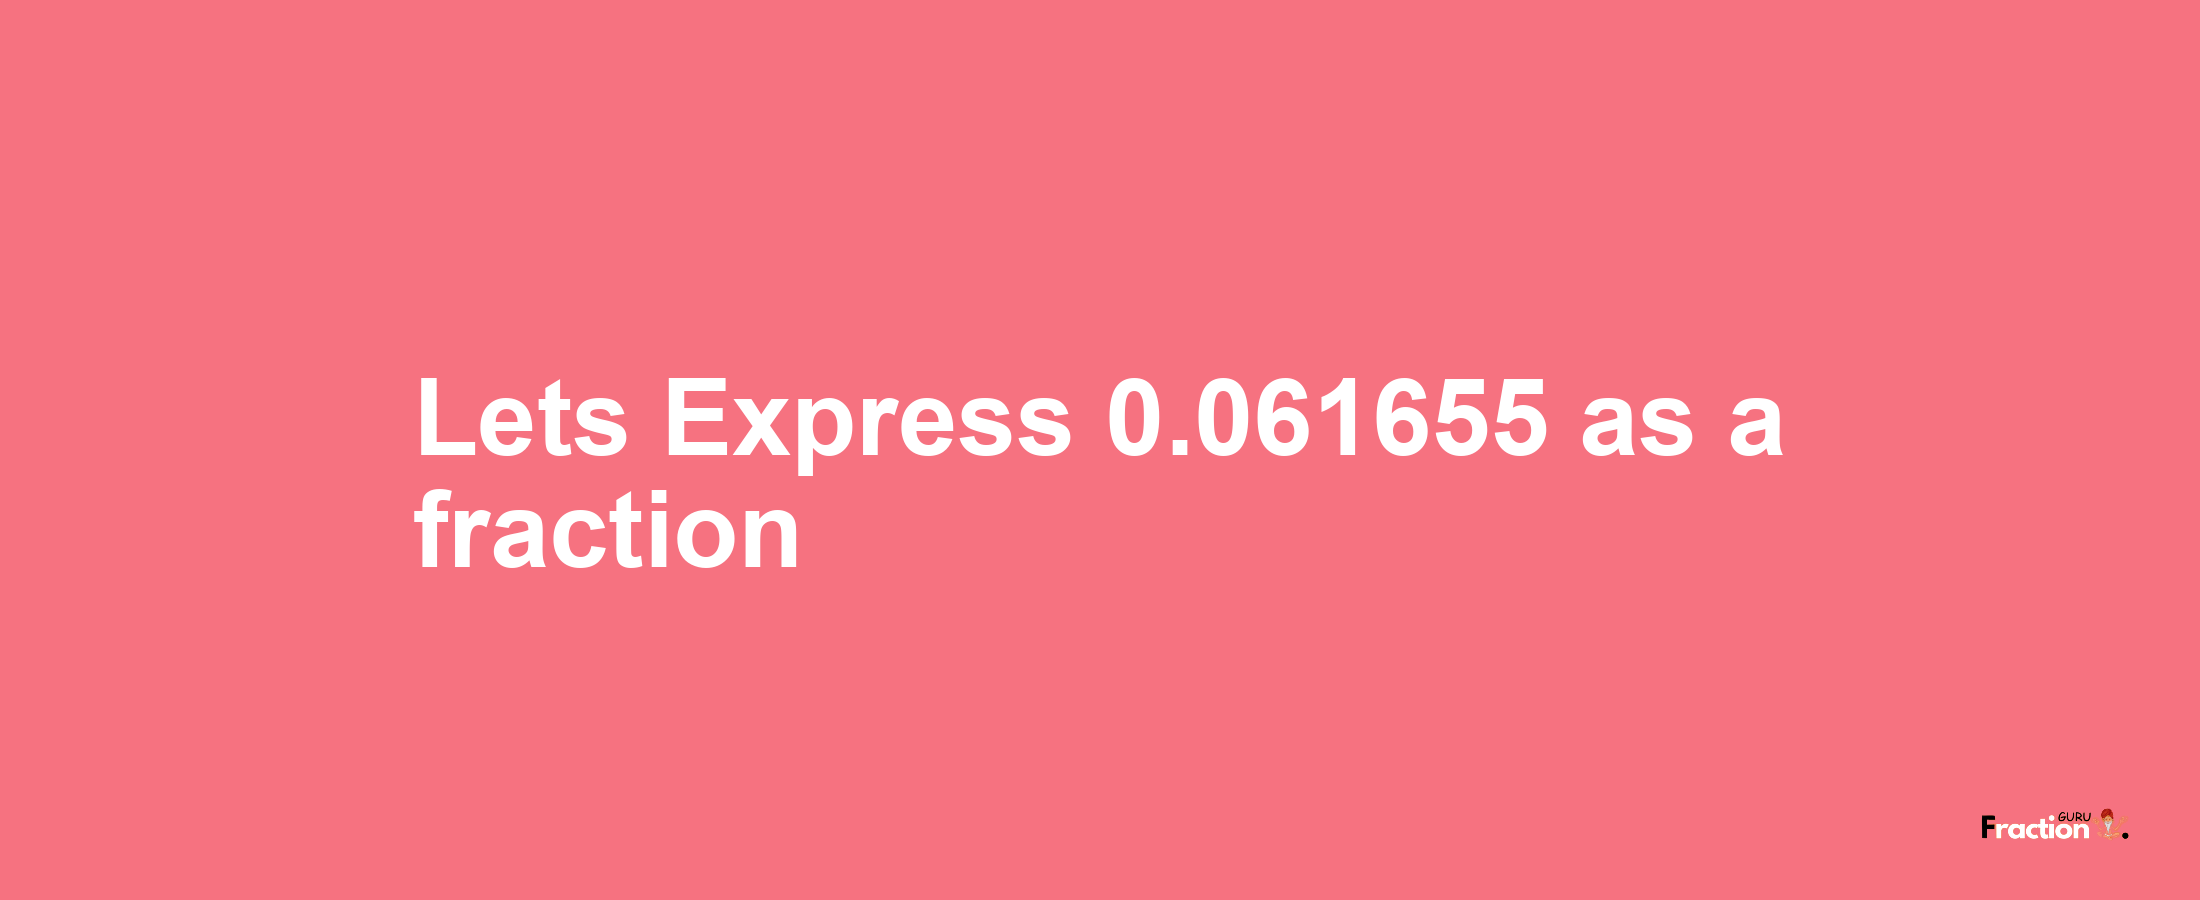 Lets Express 0.061655 as afraction